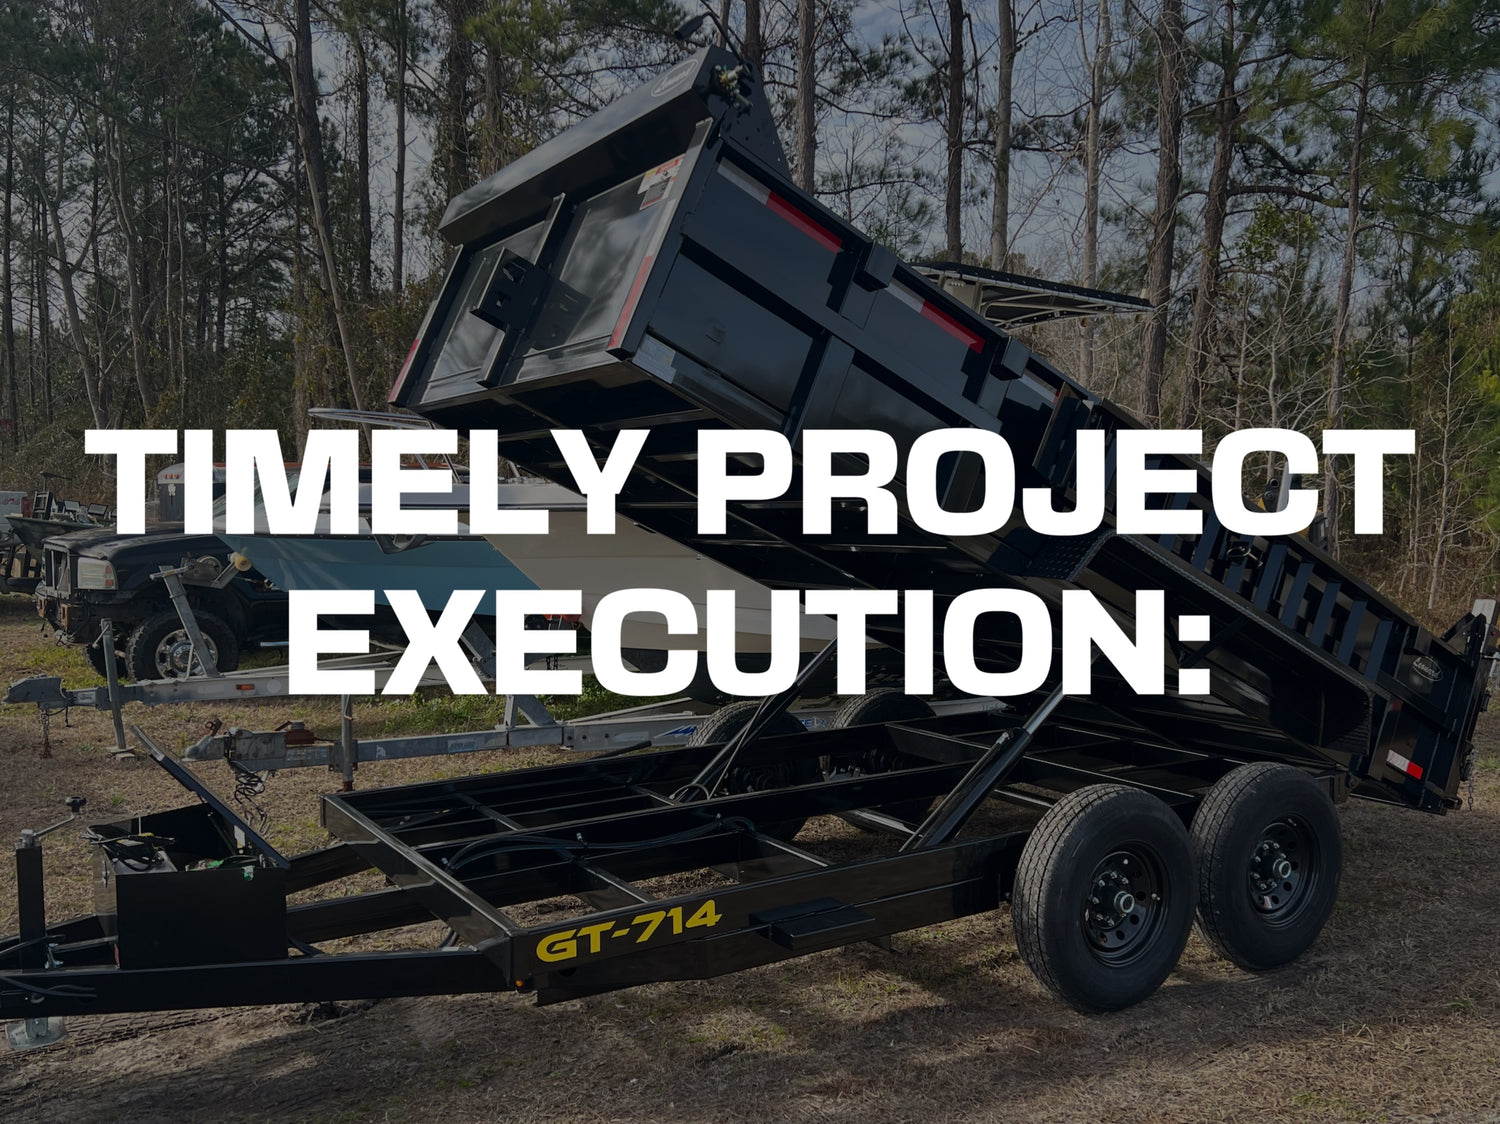 Carolina earthwerx keeps a strict timeline for project execution and completion. 